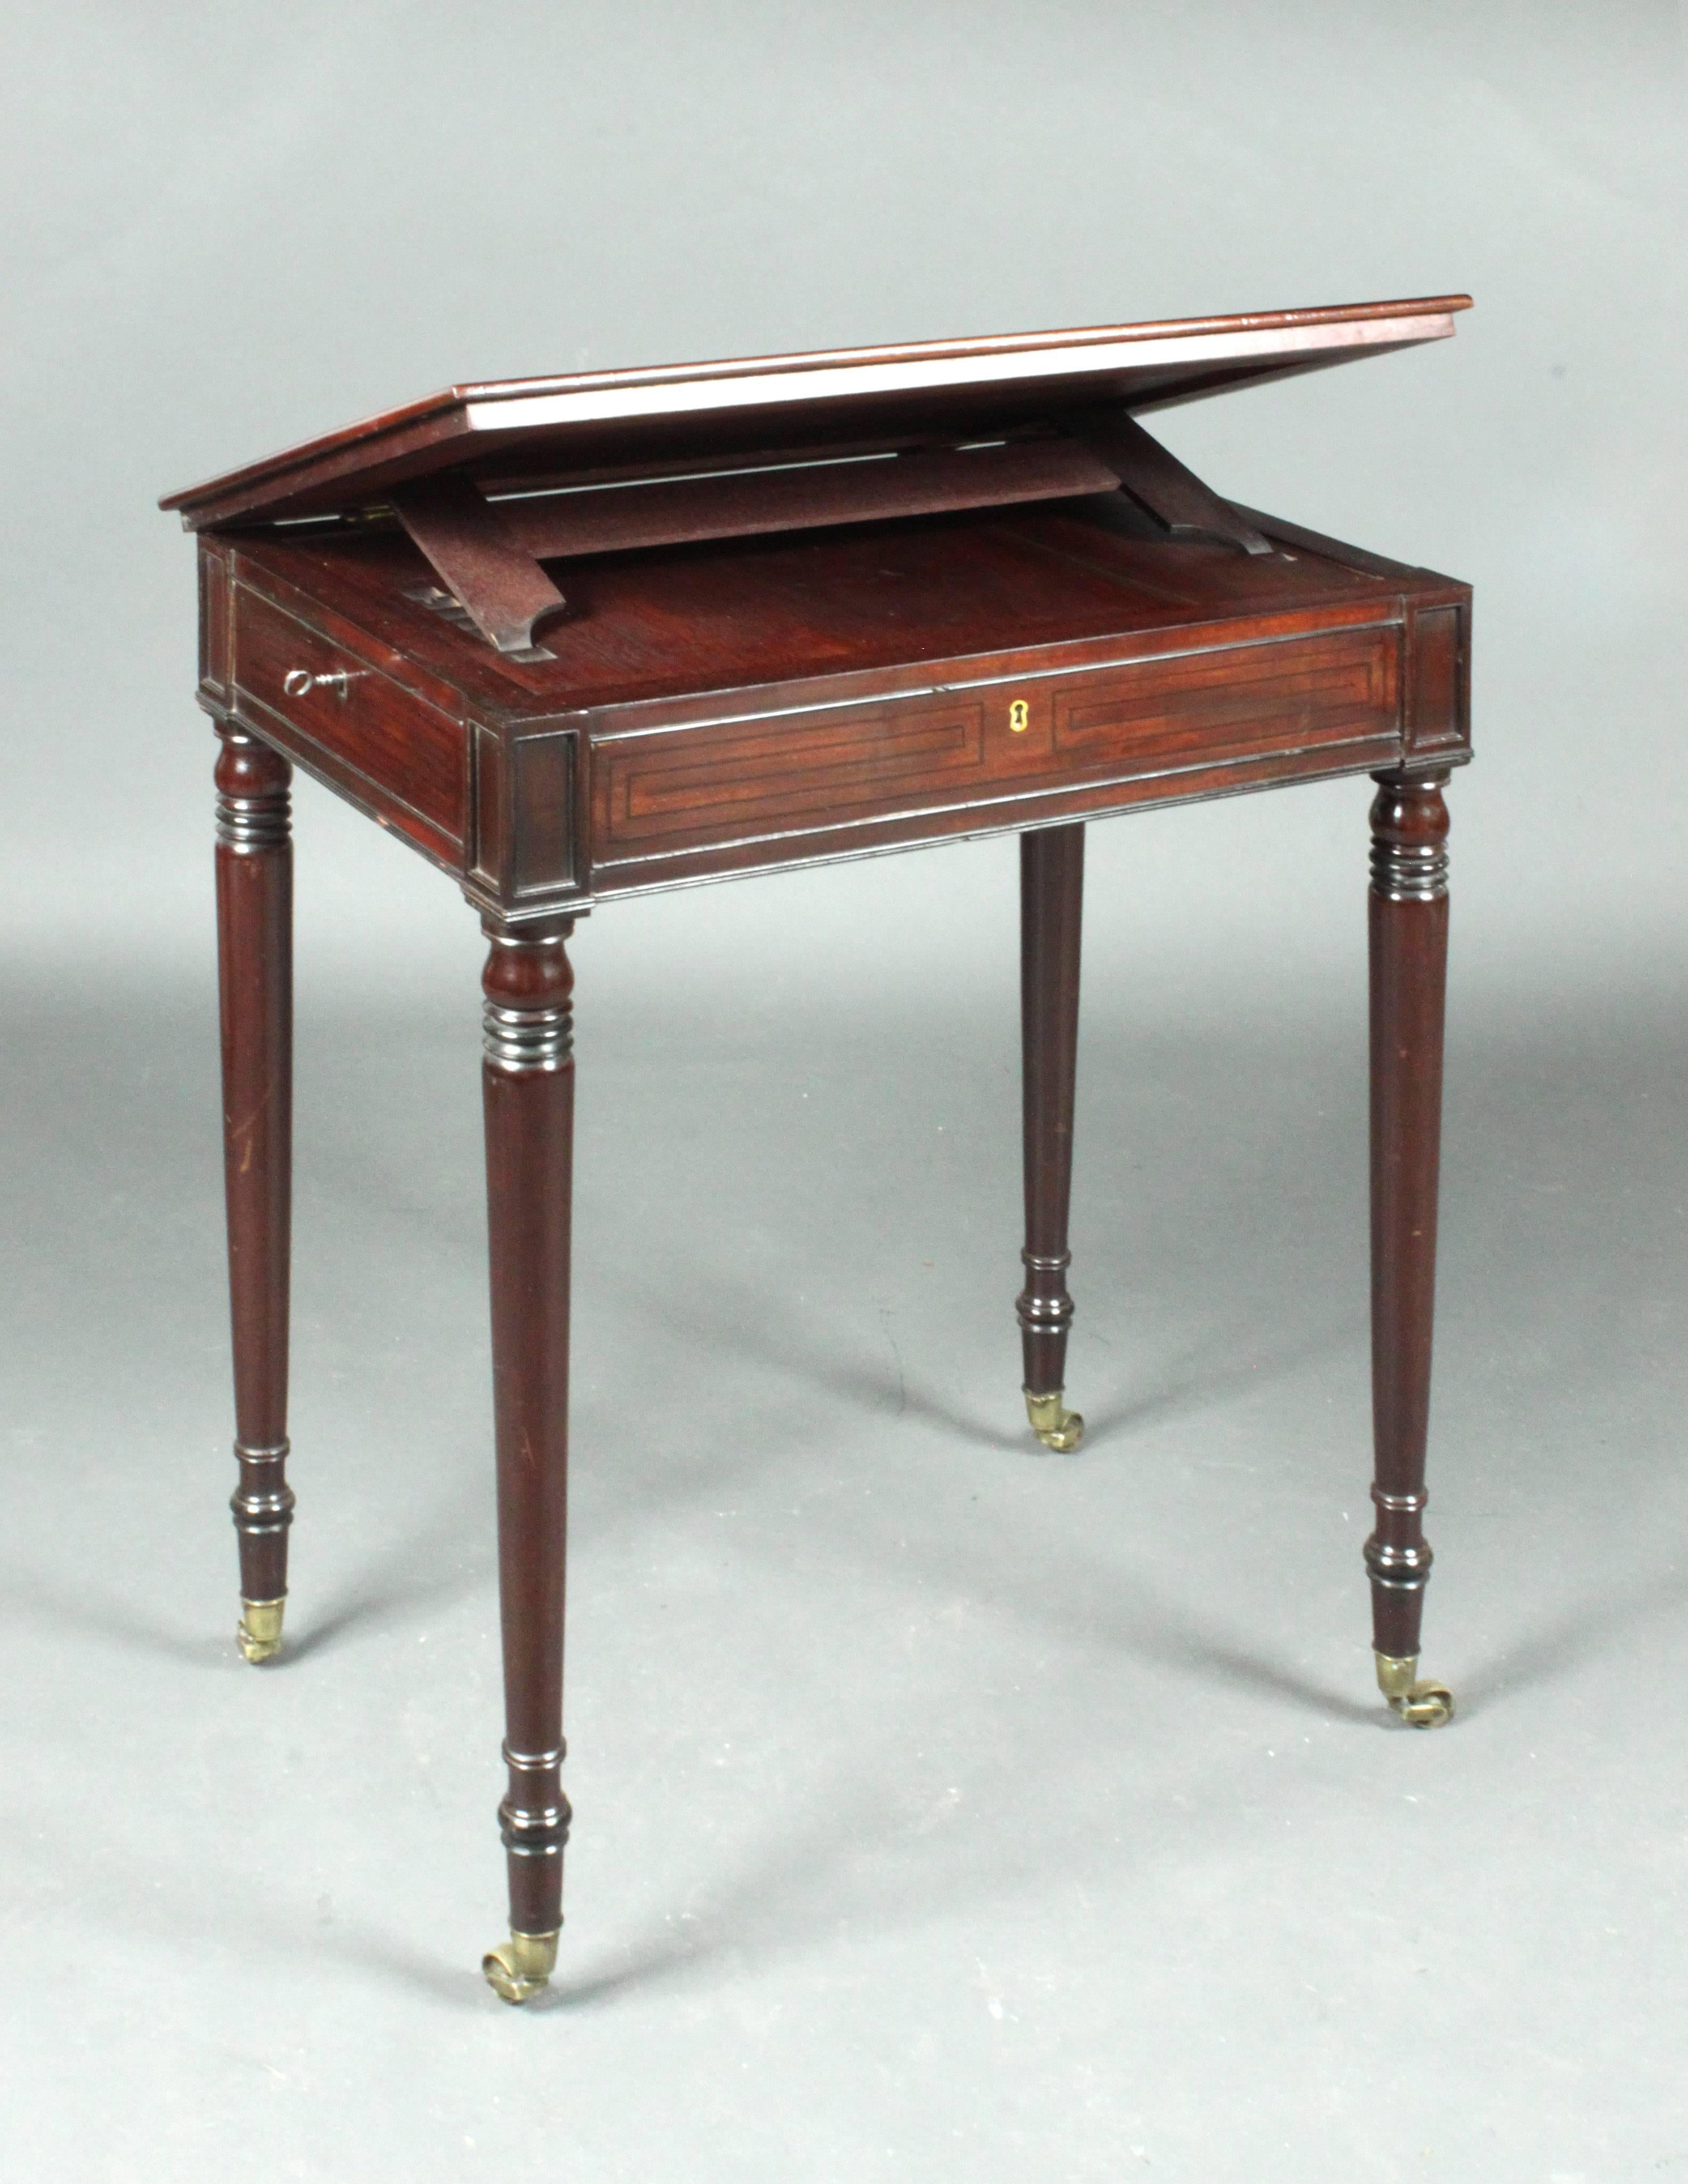 Regency Draftsman's Table In Good Condition For Sale In Bradford-on-Avon, Wiltshire